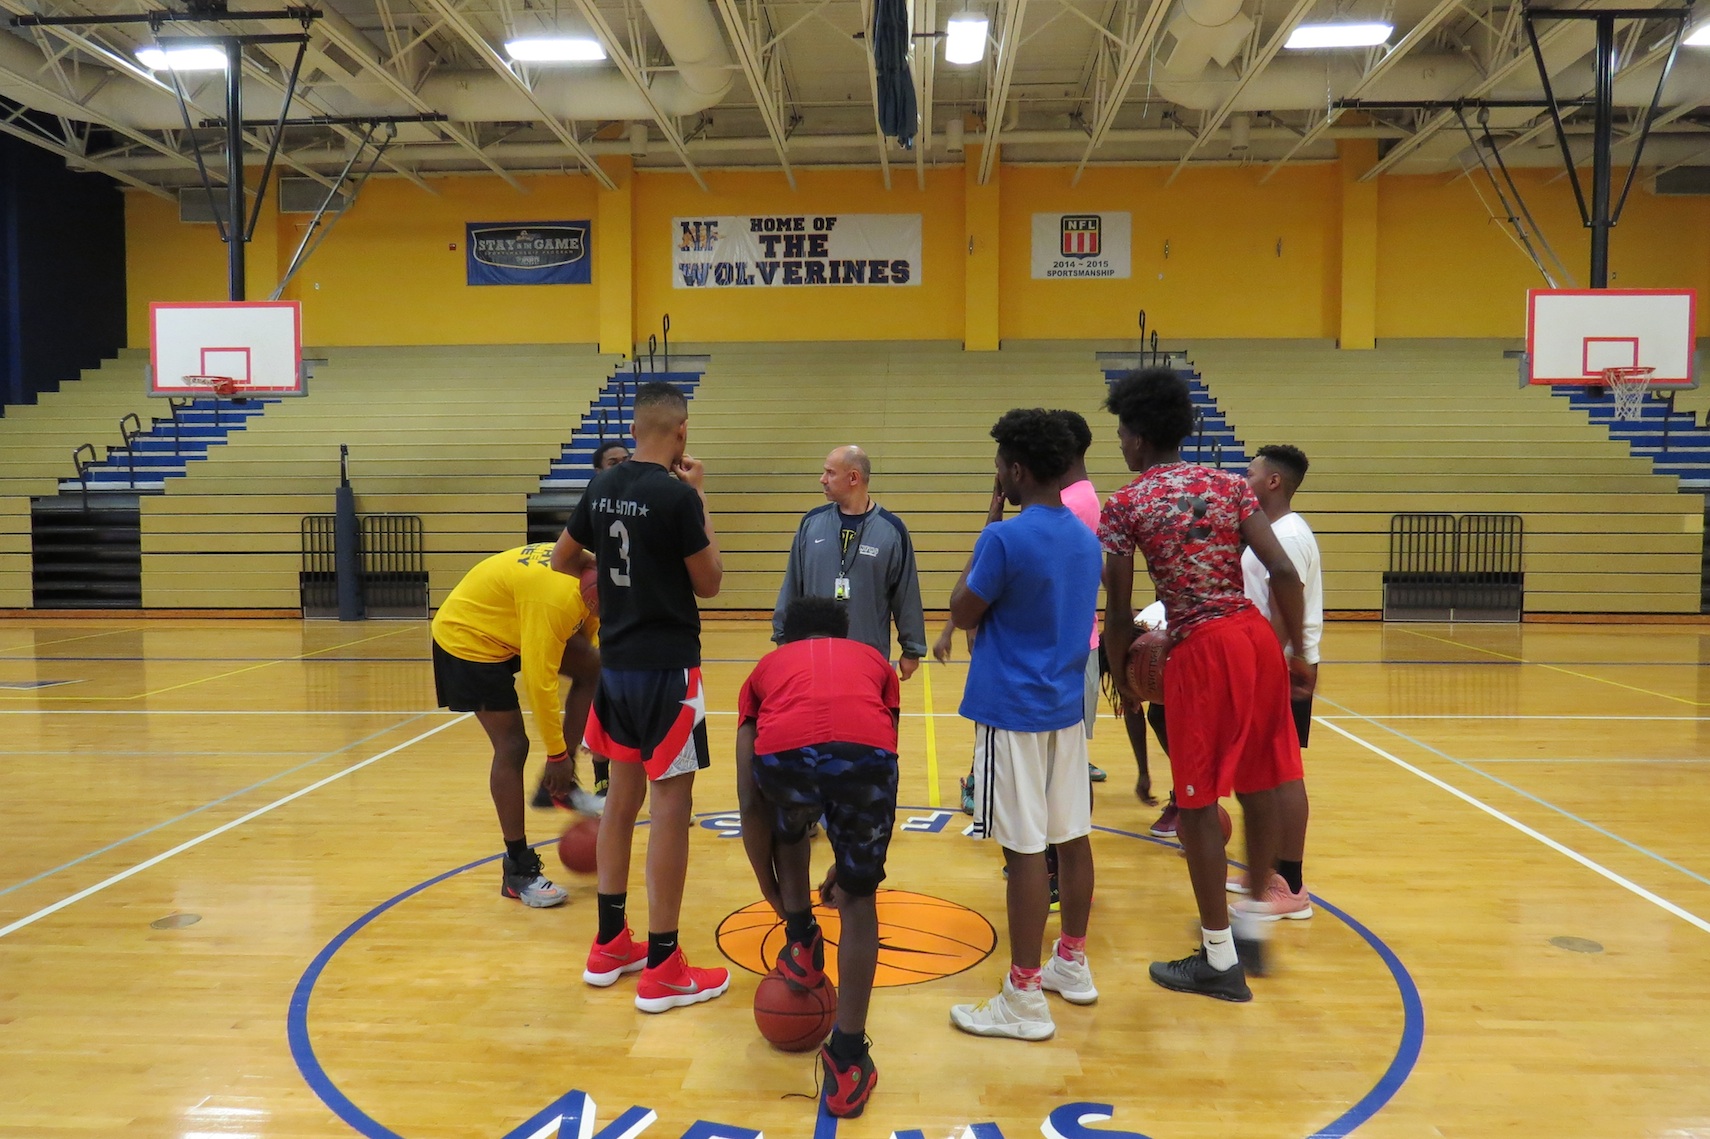 Coach Sal Constantino addresses his team prior to Tuesday's practice. Constantino is now in his eighth year as head coach of the Niagara Falls program. (Photo by David Yarger)